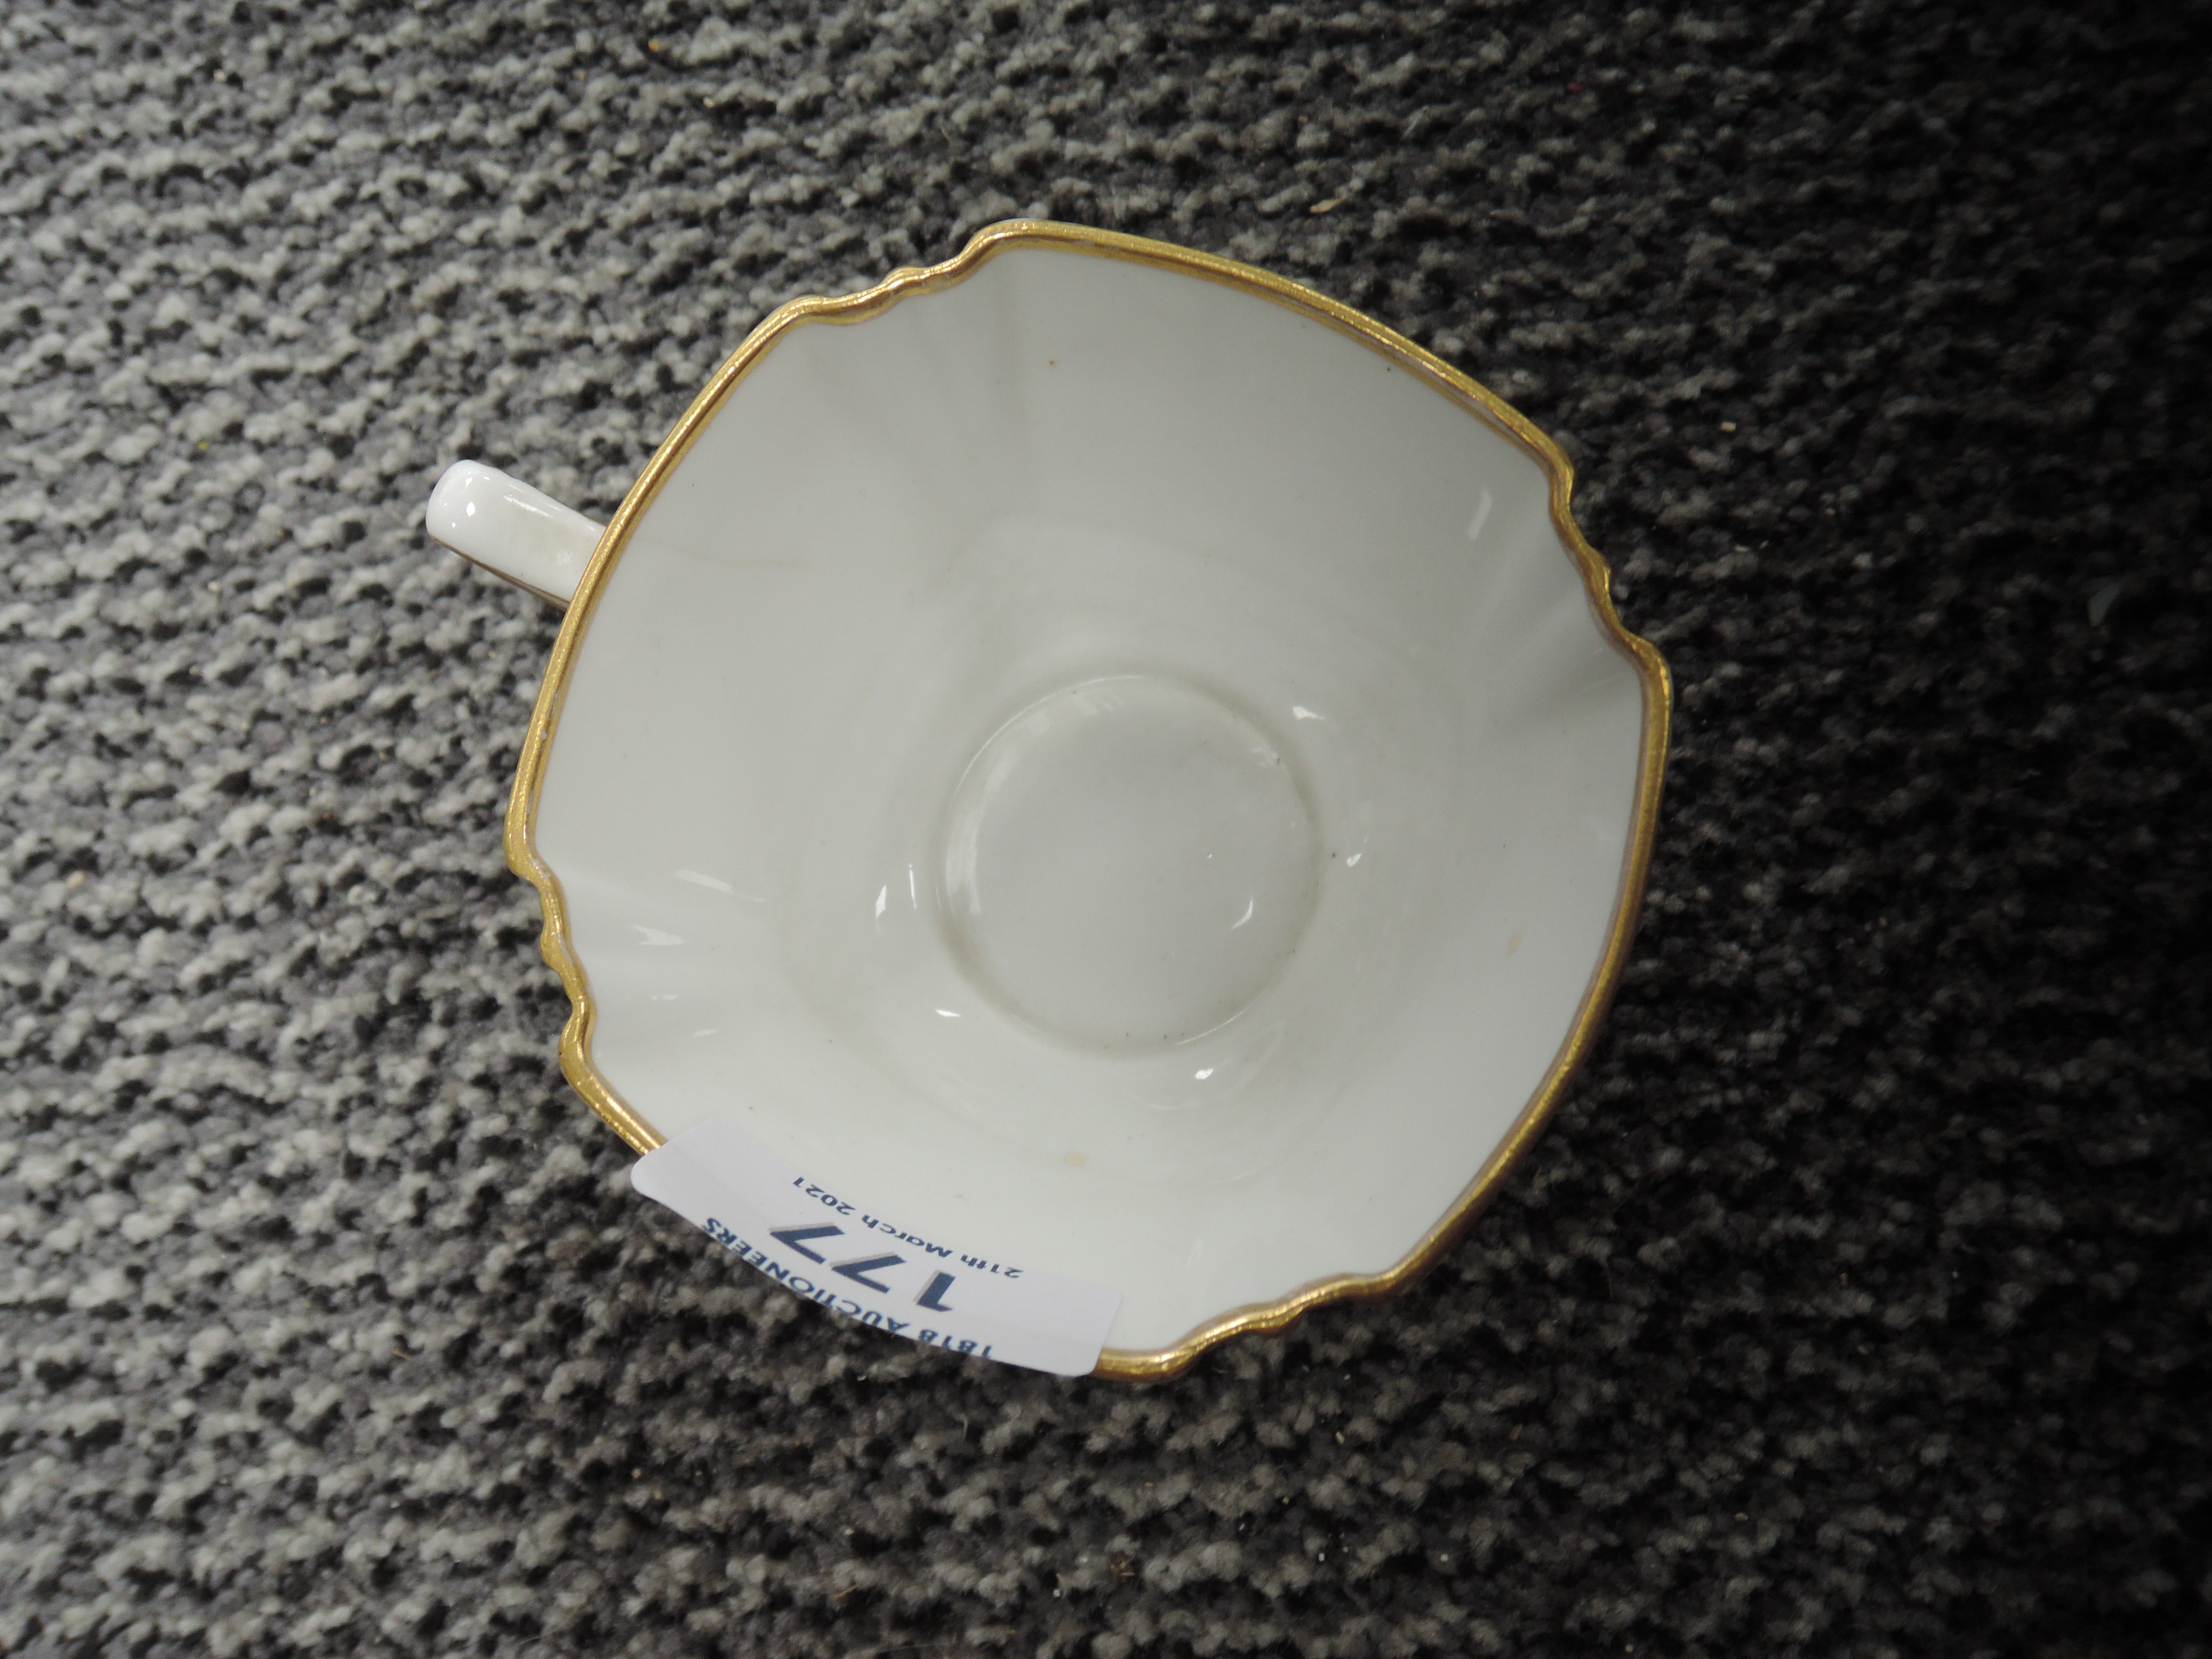 An exquisite tea cup and saucer set by Spode Copeland Pt no 3112 both pieces very good - Image 4 of 7